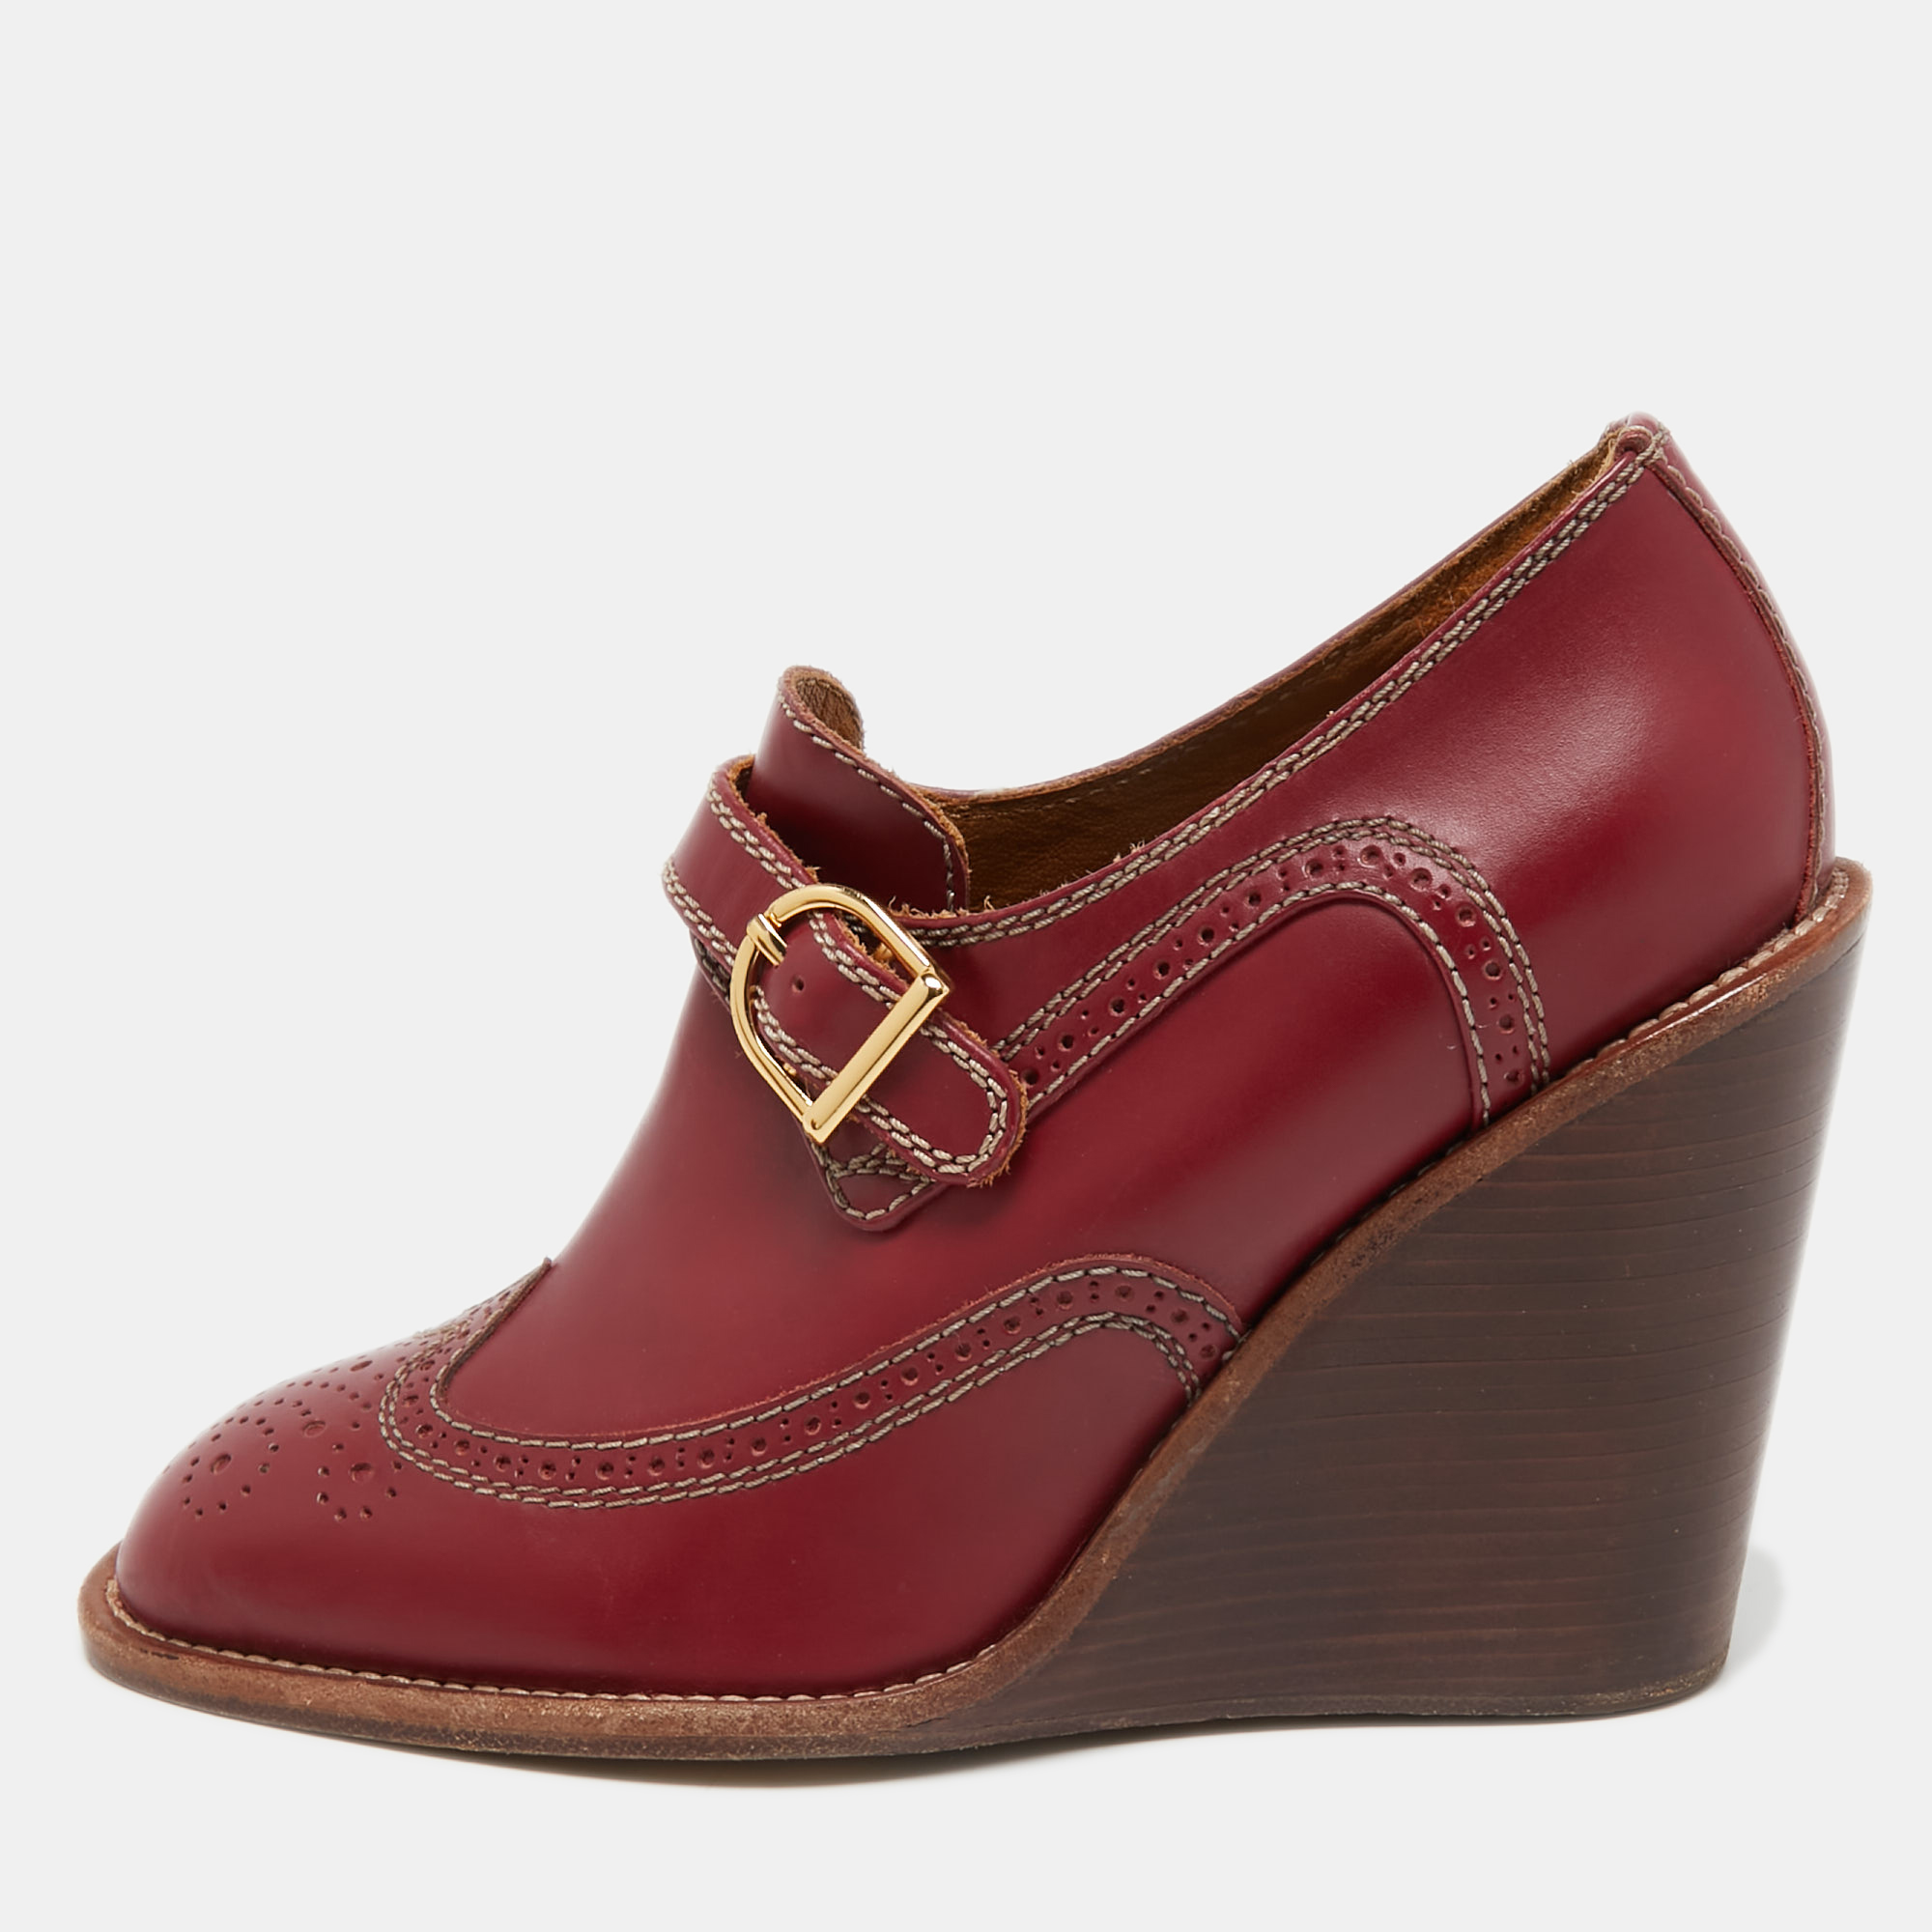 Pre-owned See By Chloé Burgundy Brogue Leather Wedge Loafer Pumps Size 38.5